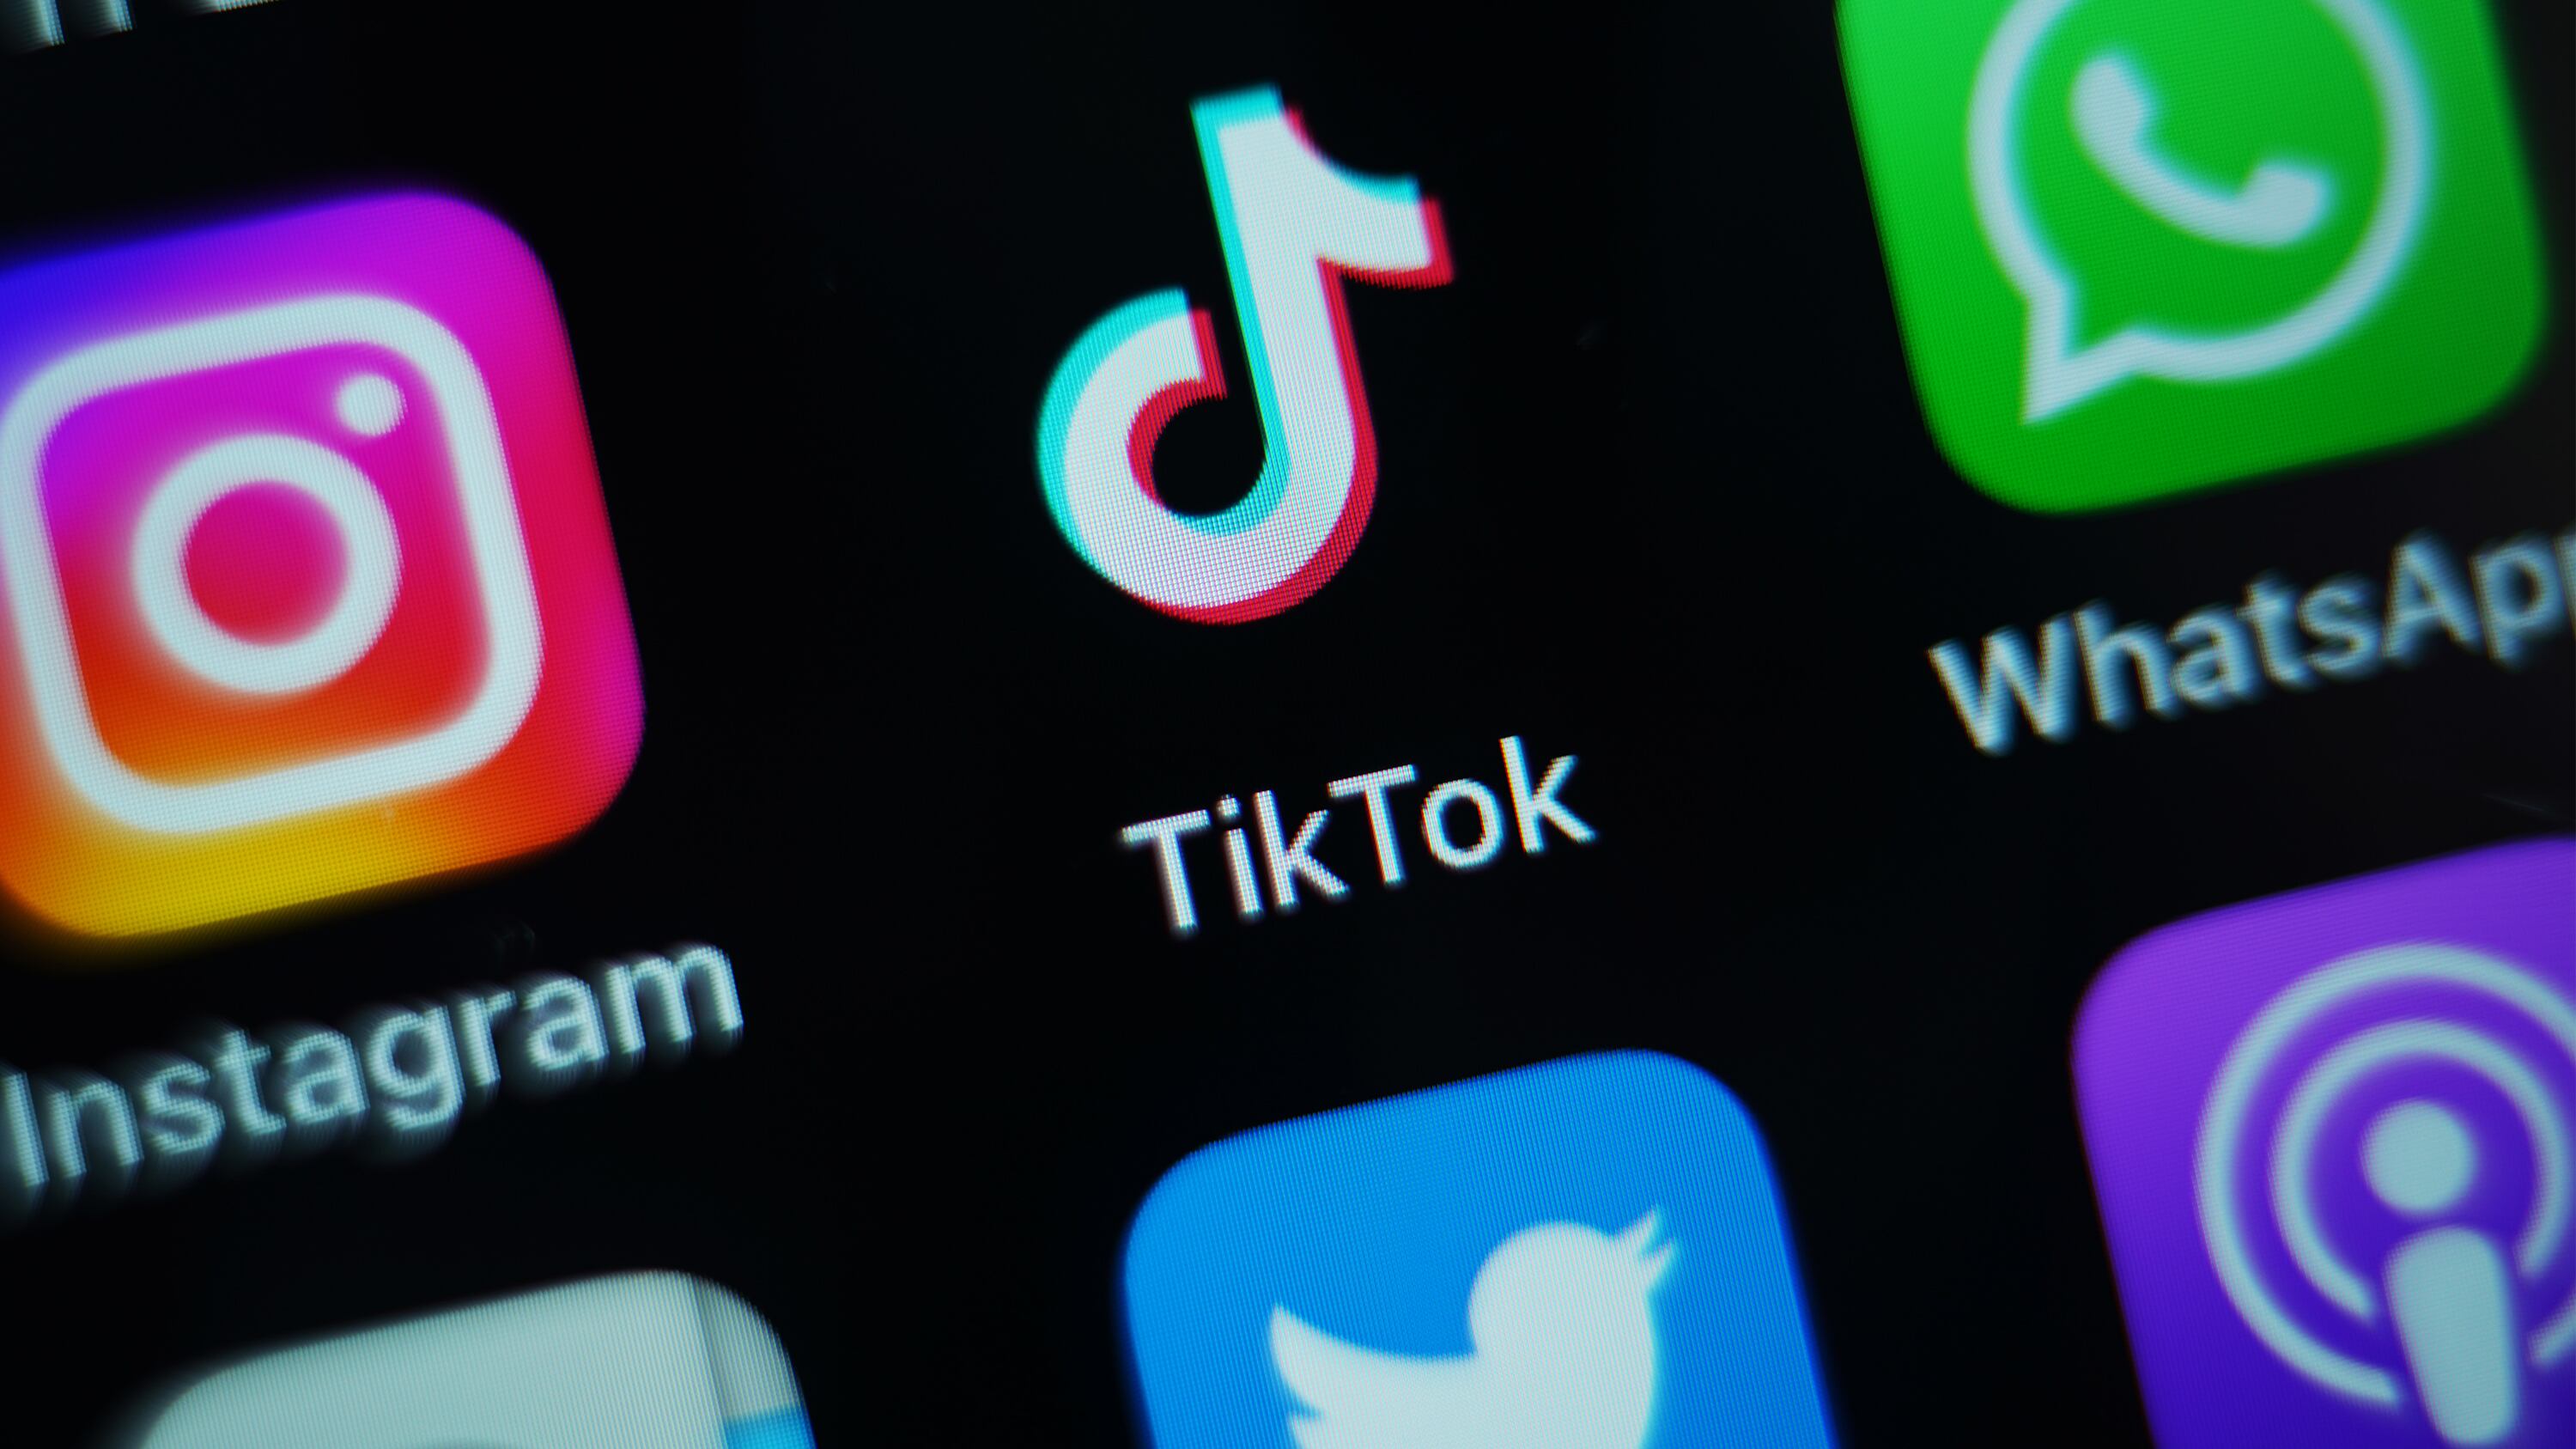 The three main parties have stepped onto a new electoral battleground during this General Election campaign – TikTok